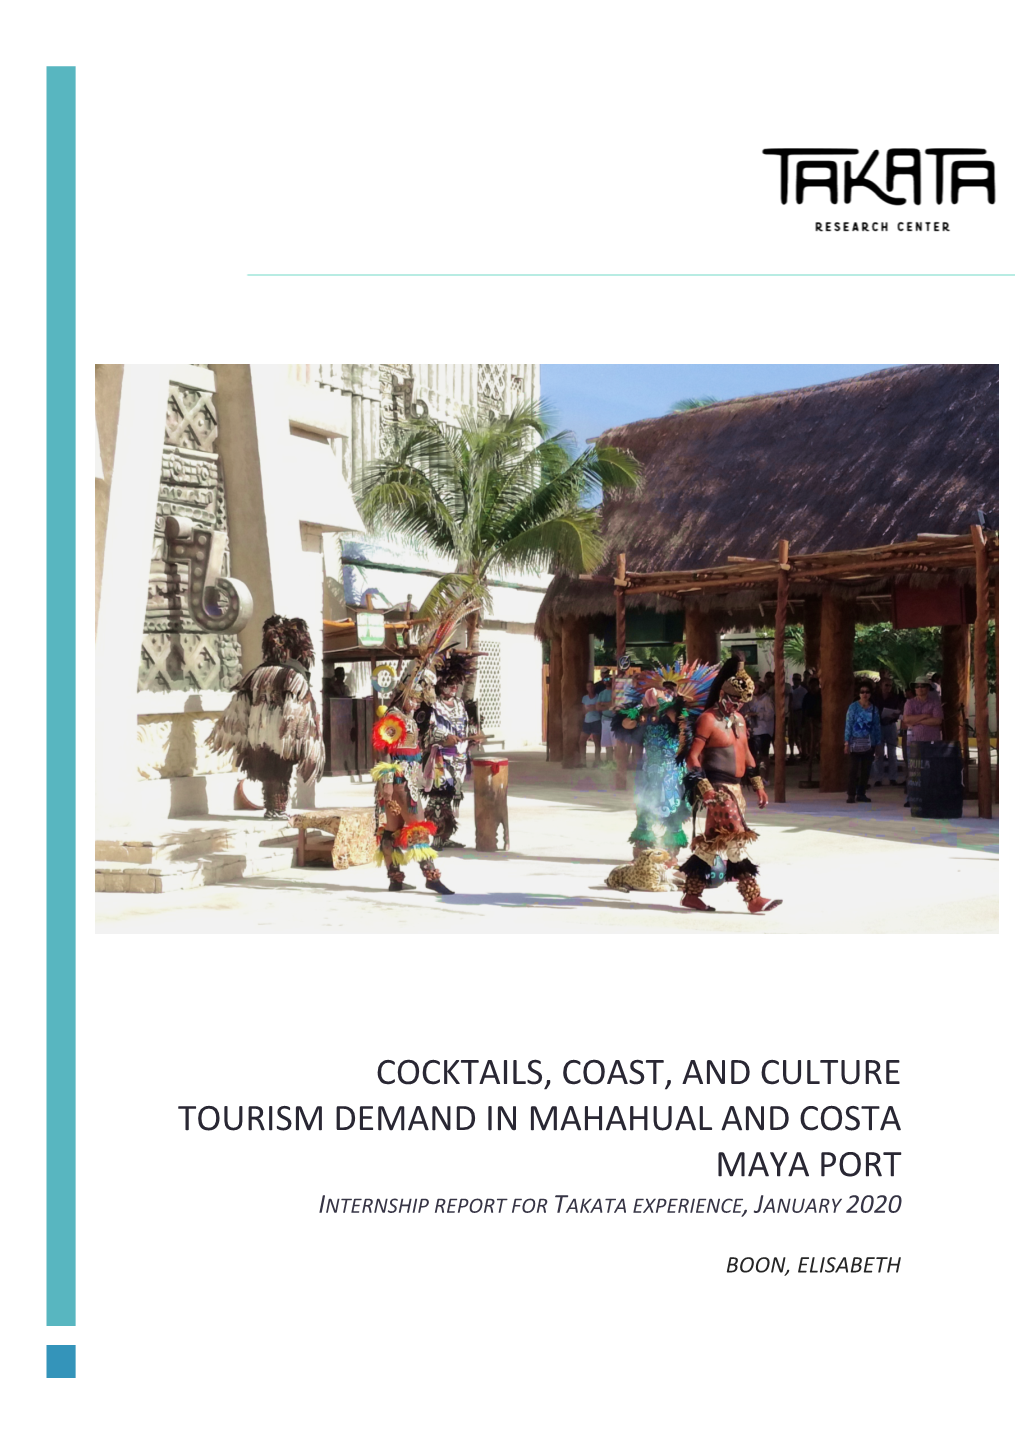 Cocktails, Coast, and Culture Tourism Demand in Mahahual and Costa Maya Port Internship Report for Takata Experience, January 2020